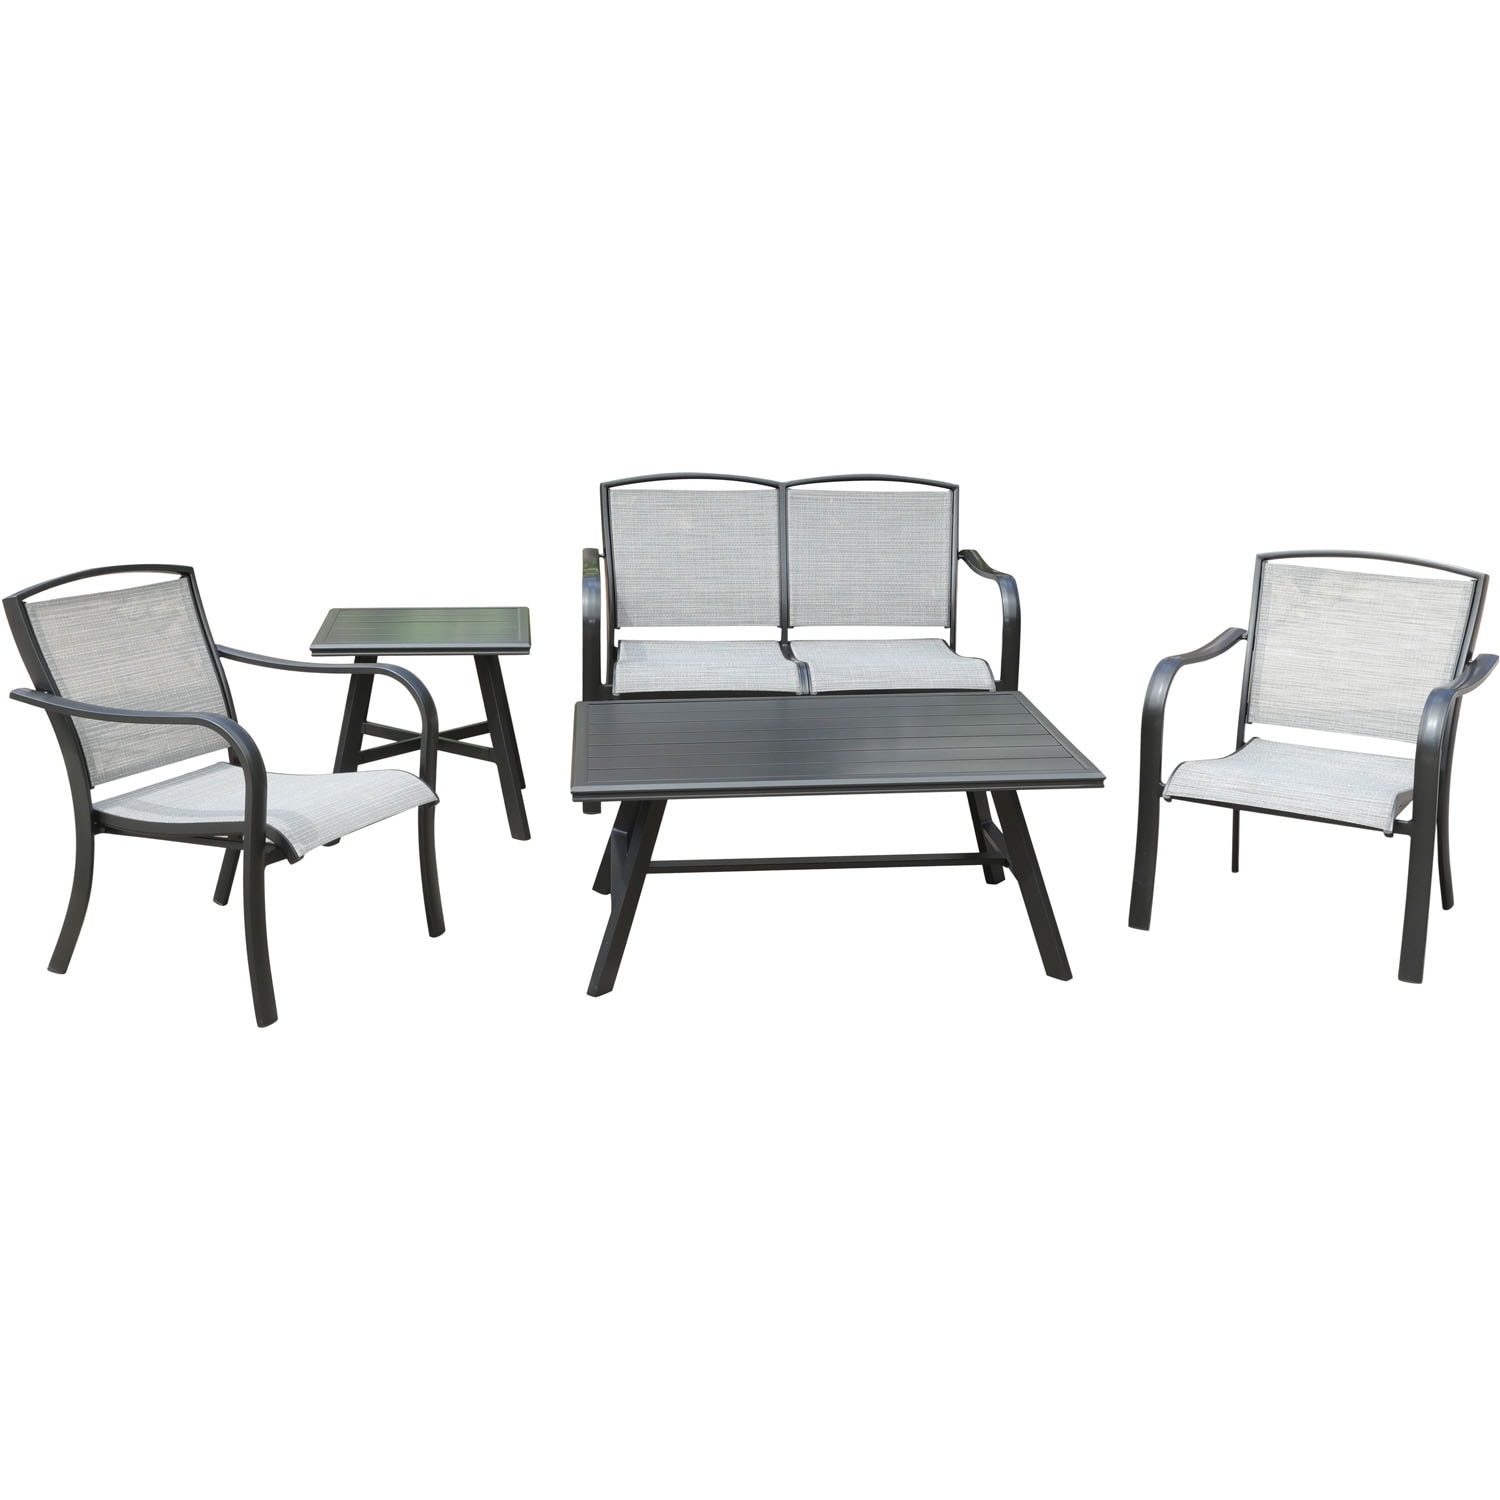 Hanover Foxhill 5-piece Commercial-grade Patio Seating Set With 2 Sling Chairs  Sling Loveseat  Coffee Table  And Side Table